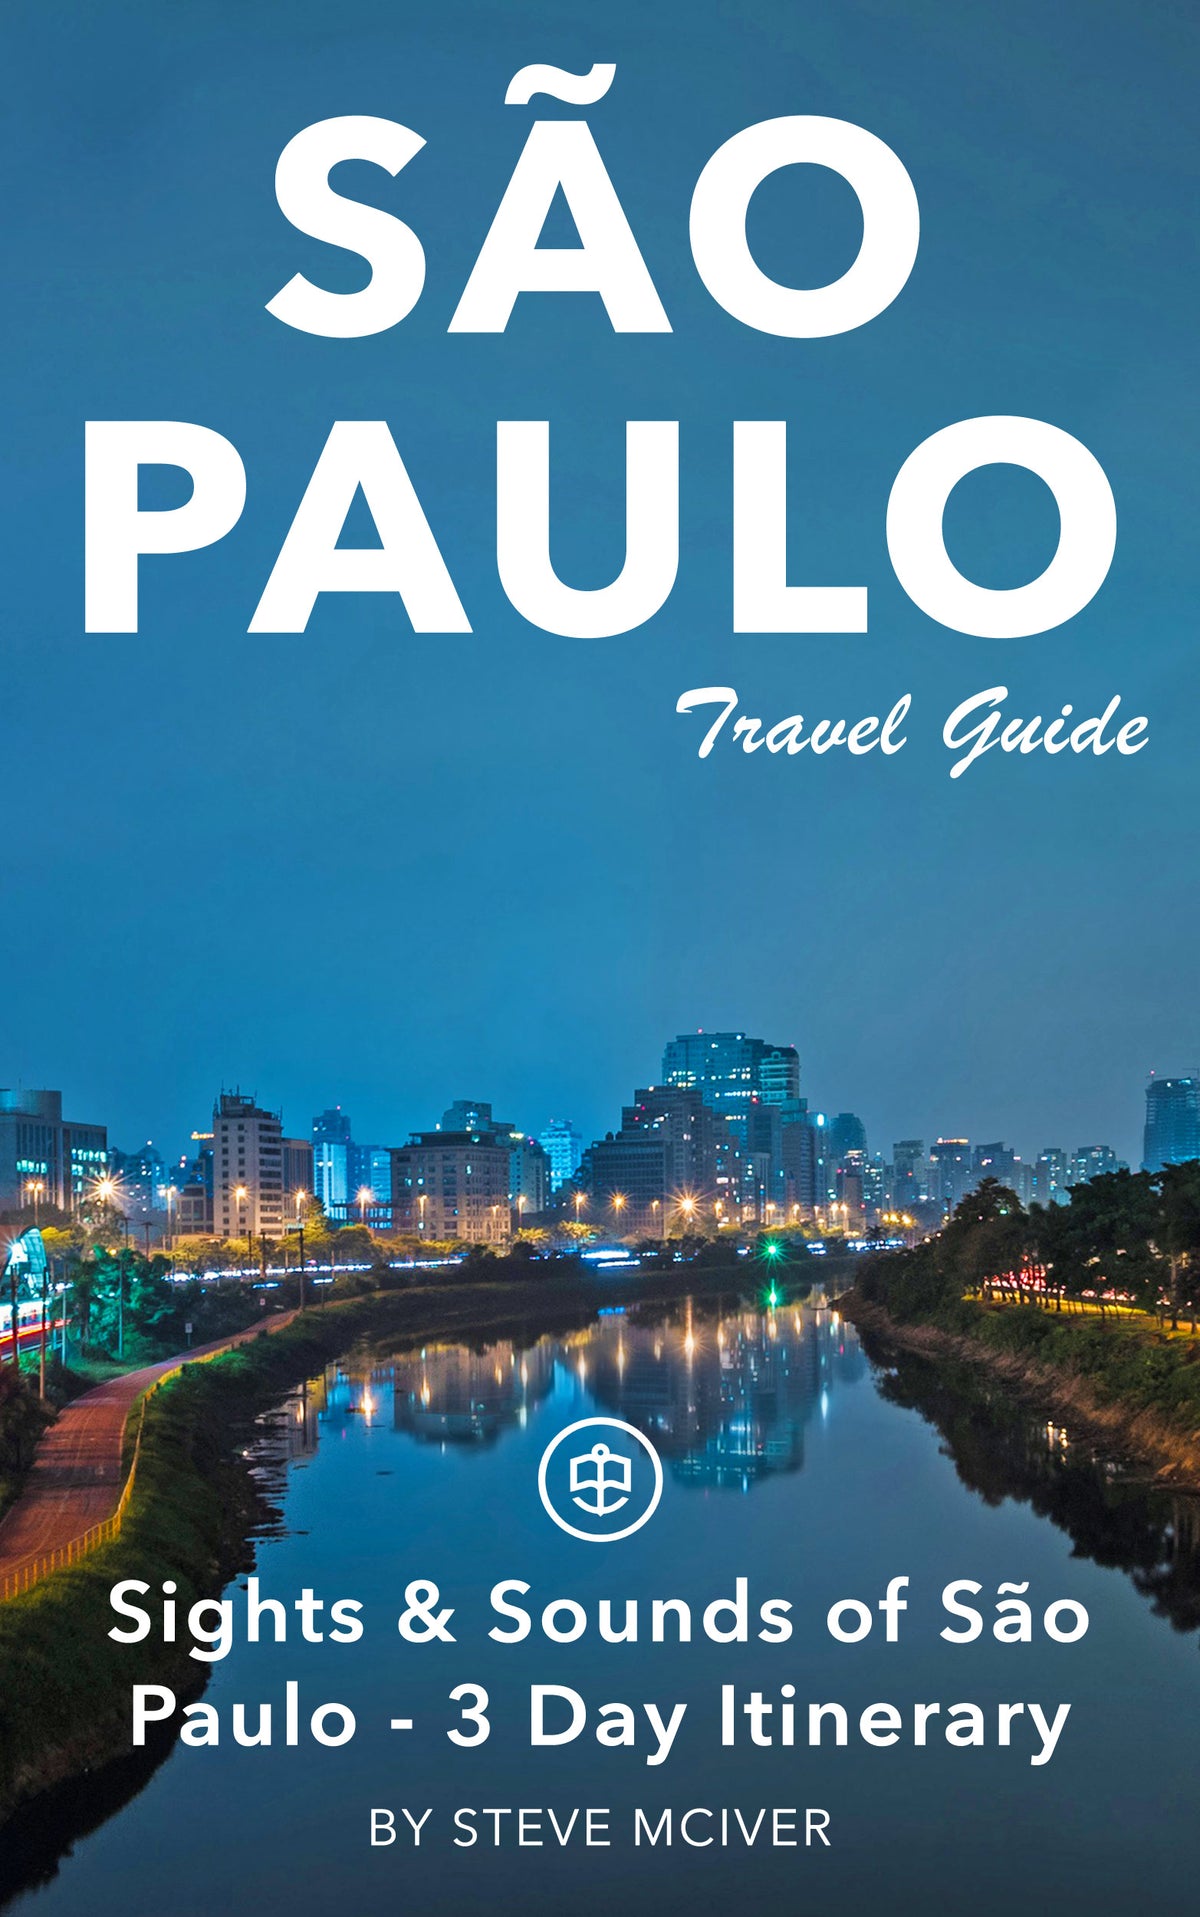 Sights & Sounds of São Paulo - 3-Day Itinerary